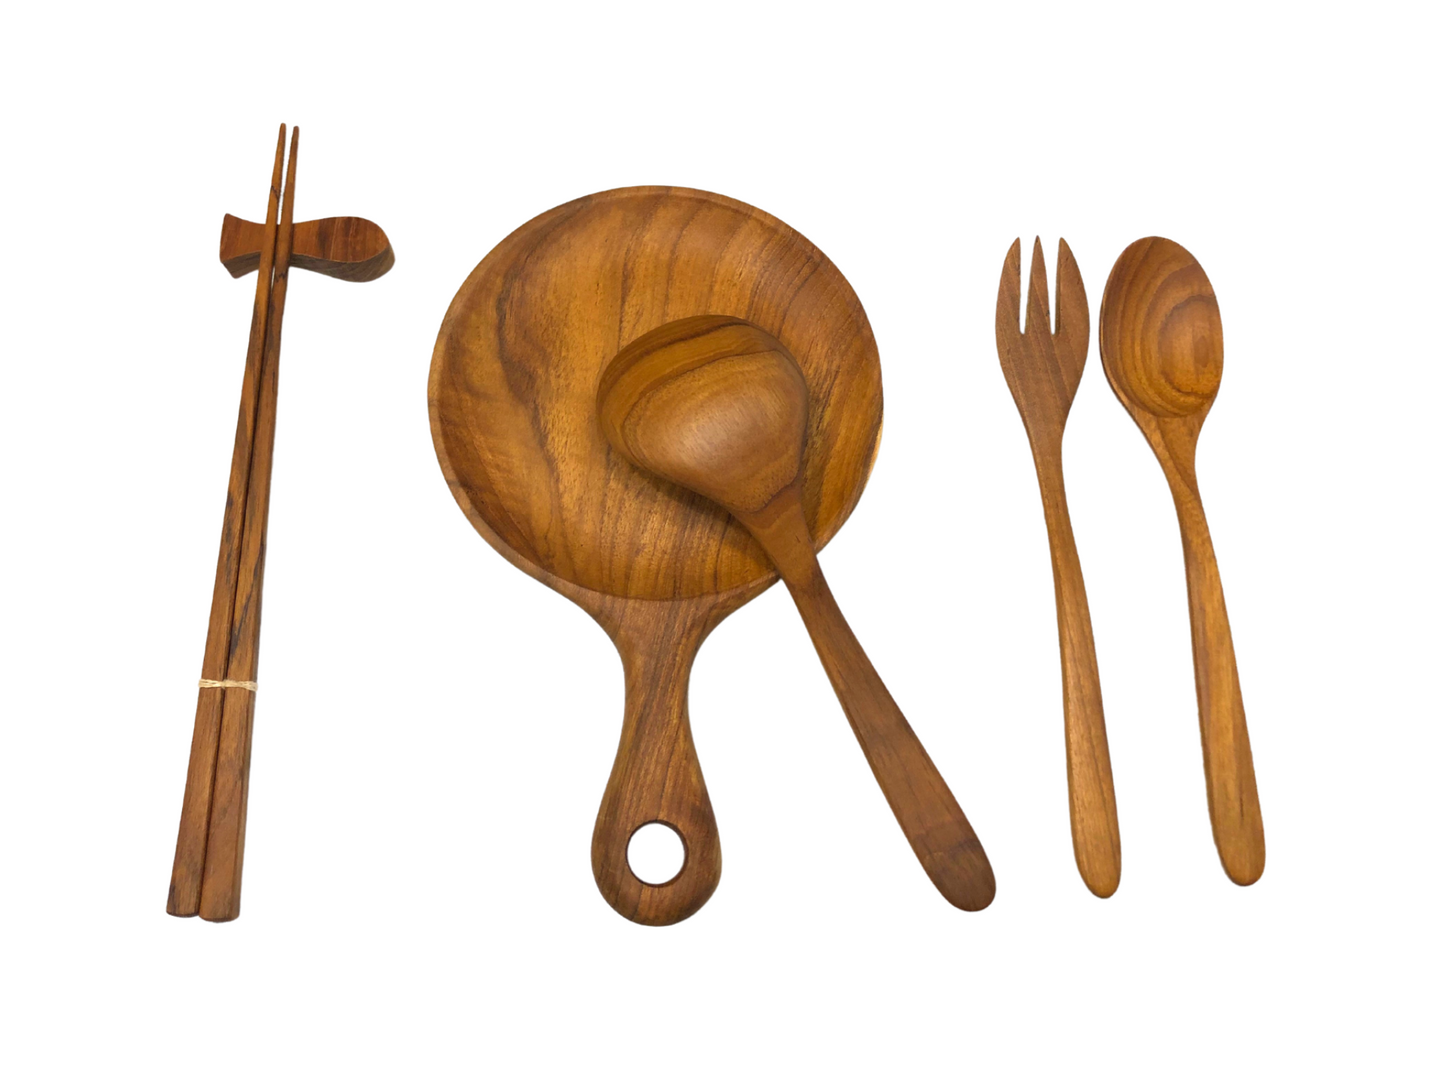 A600010013-Thailand pure handmade teak soup fork set (spoon + fork) tableware kitchen conditioning tools